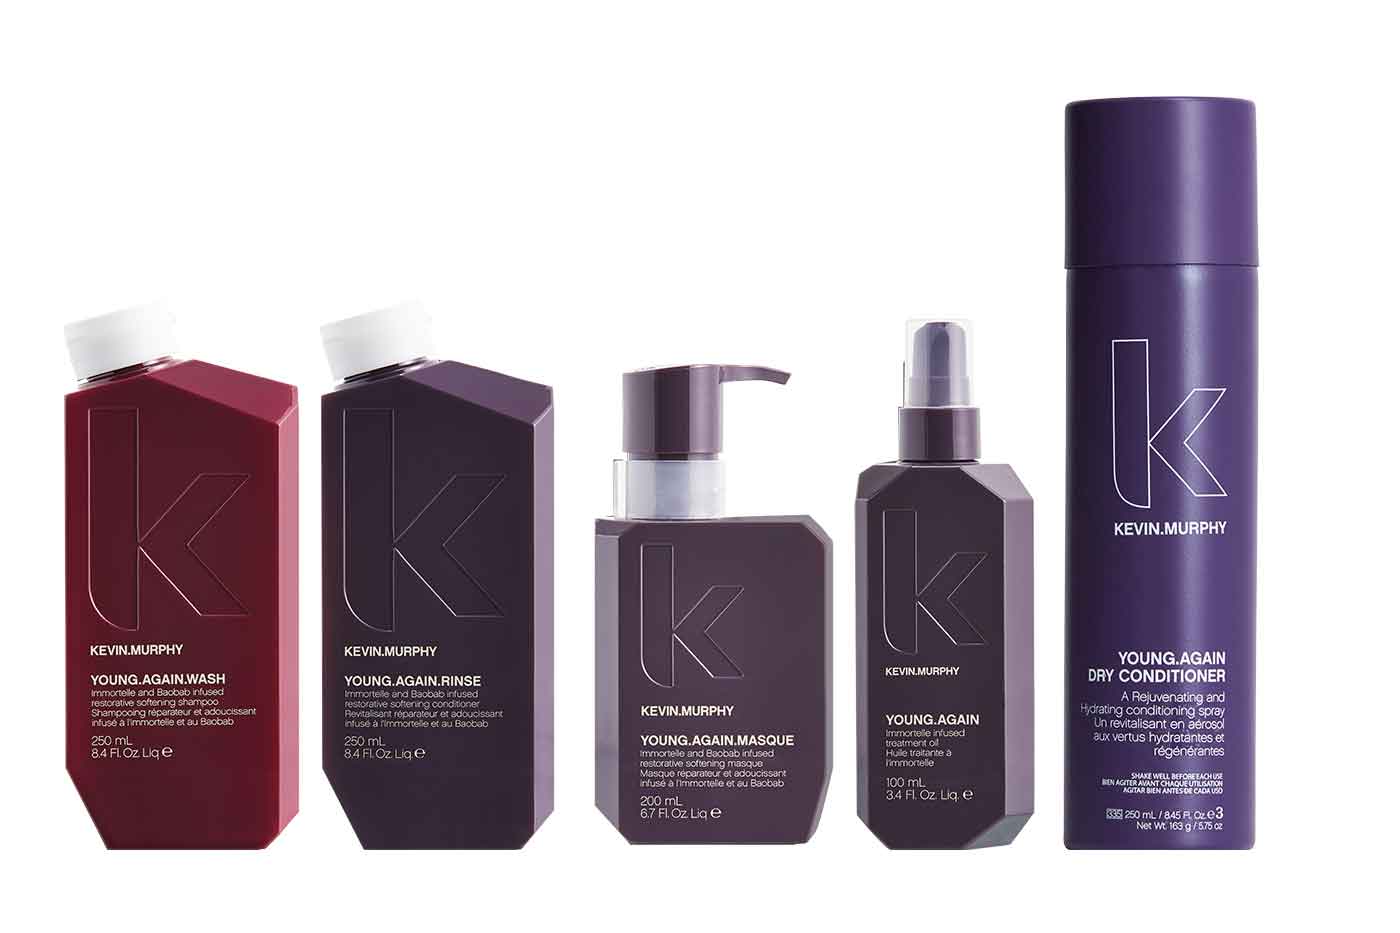  Youthful Hair with KEVIN MURPHY’s Young.Again Range